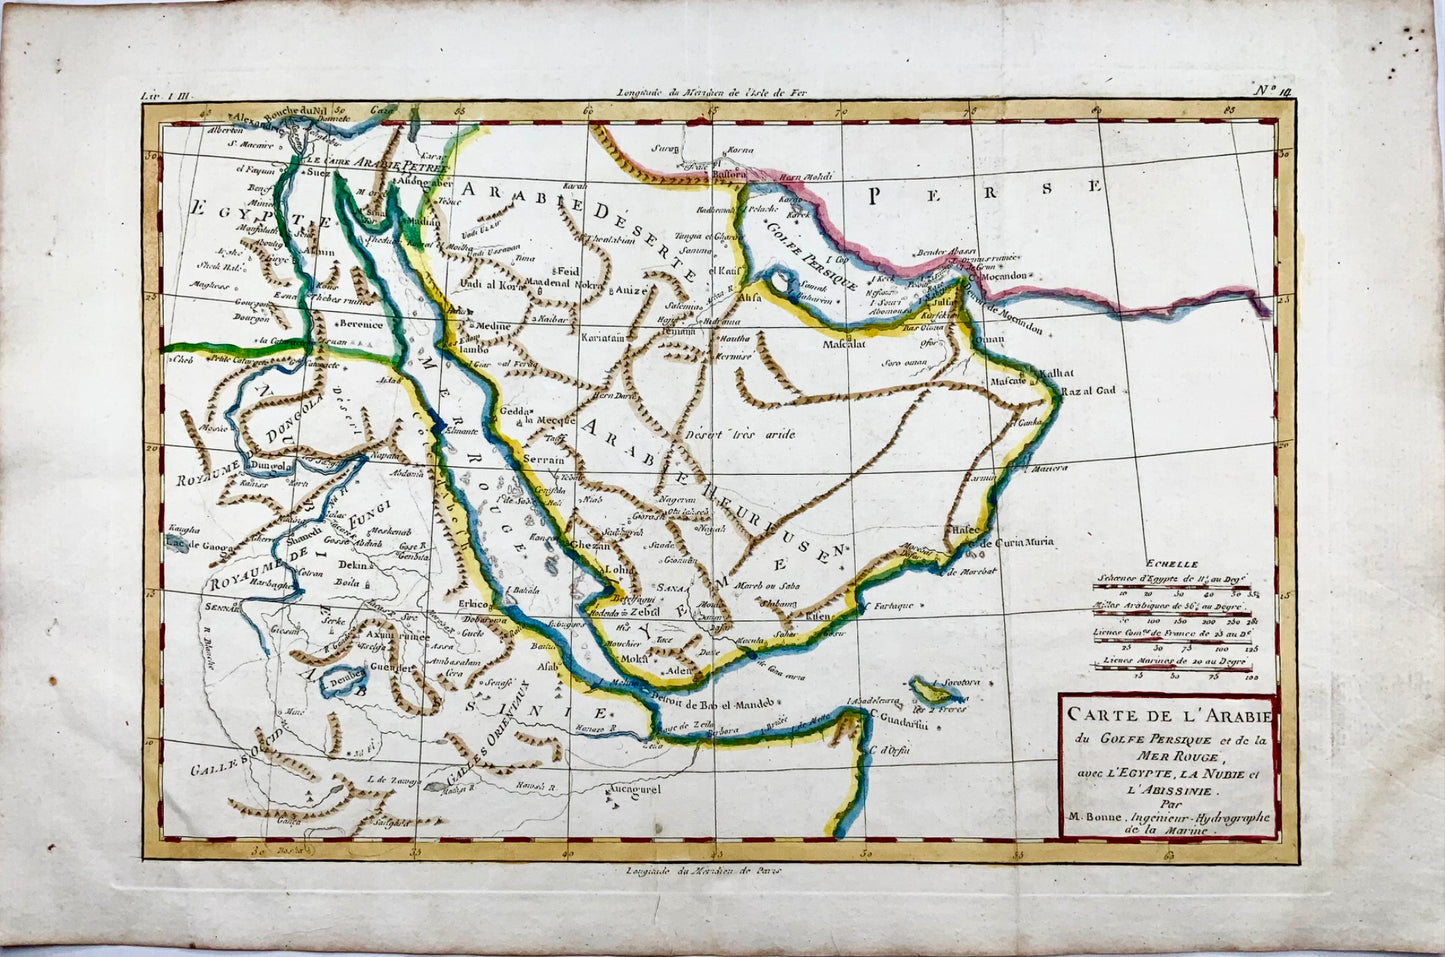 1780 Bonne, map of Middle East, Persia, Red Sea, Egypt, Nubia hand coloured